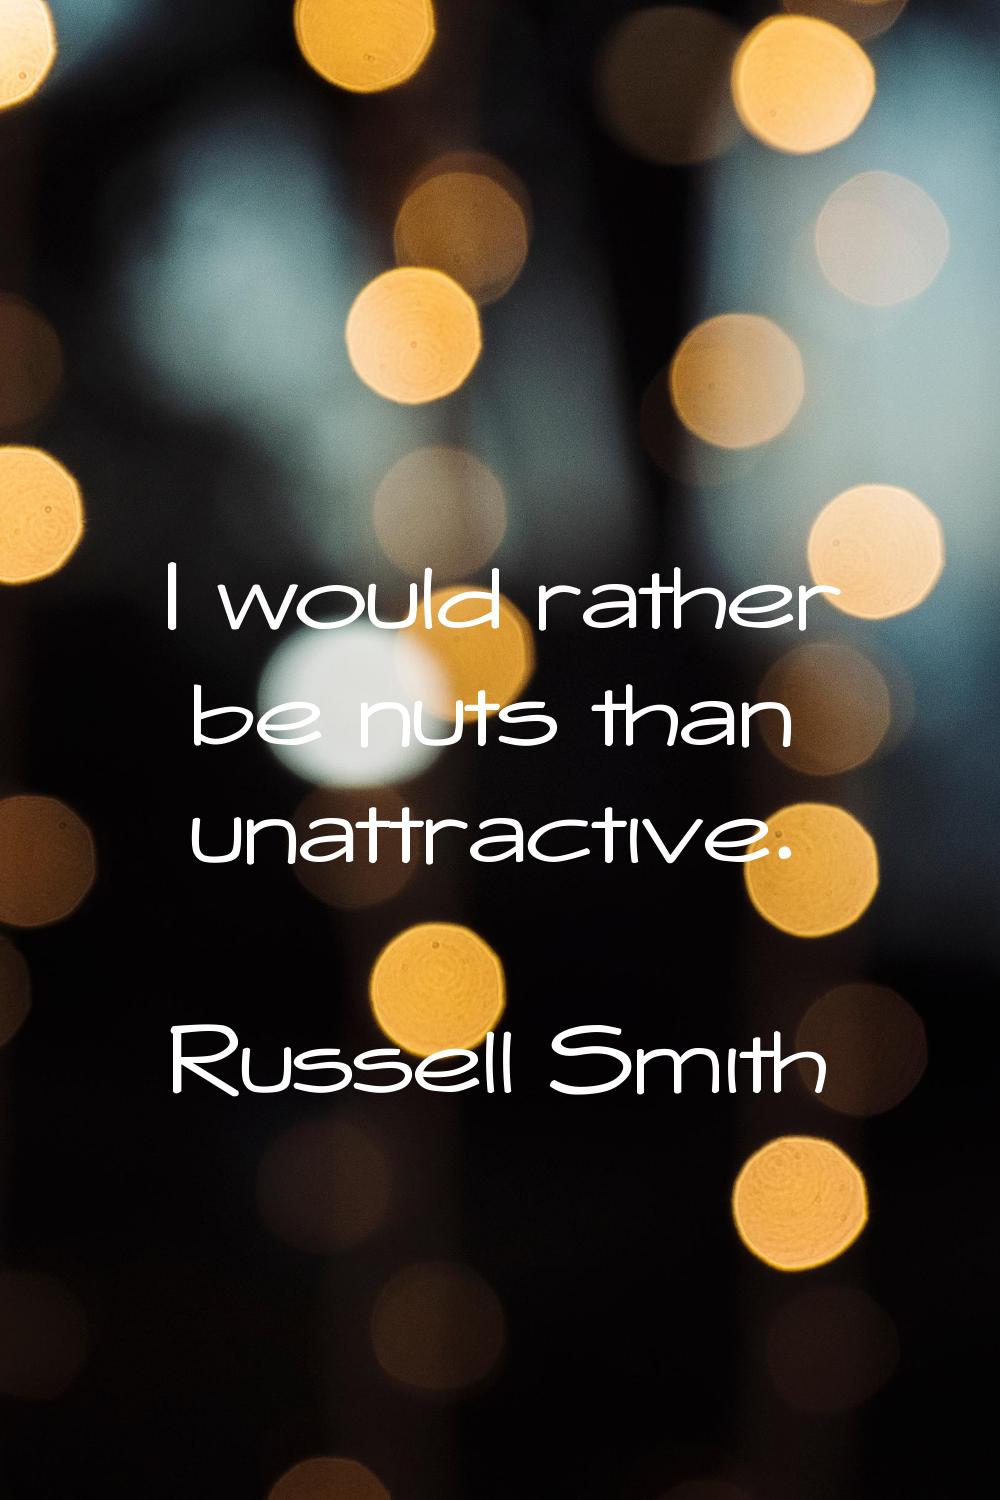 I would rather be nuts than unattractive.